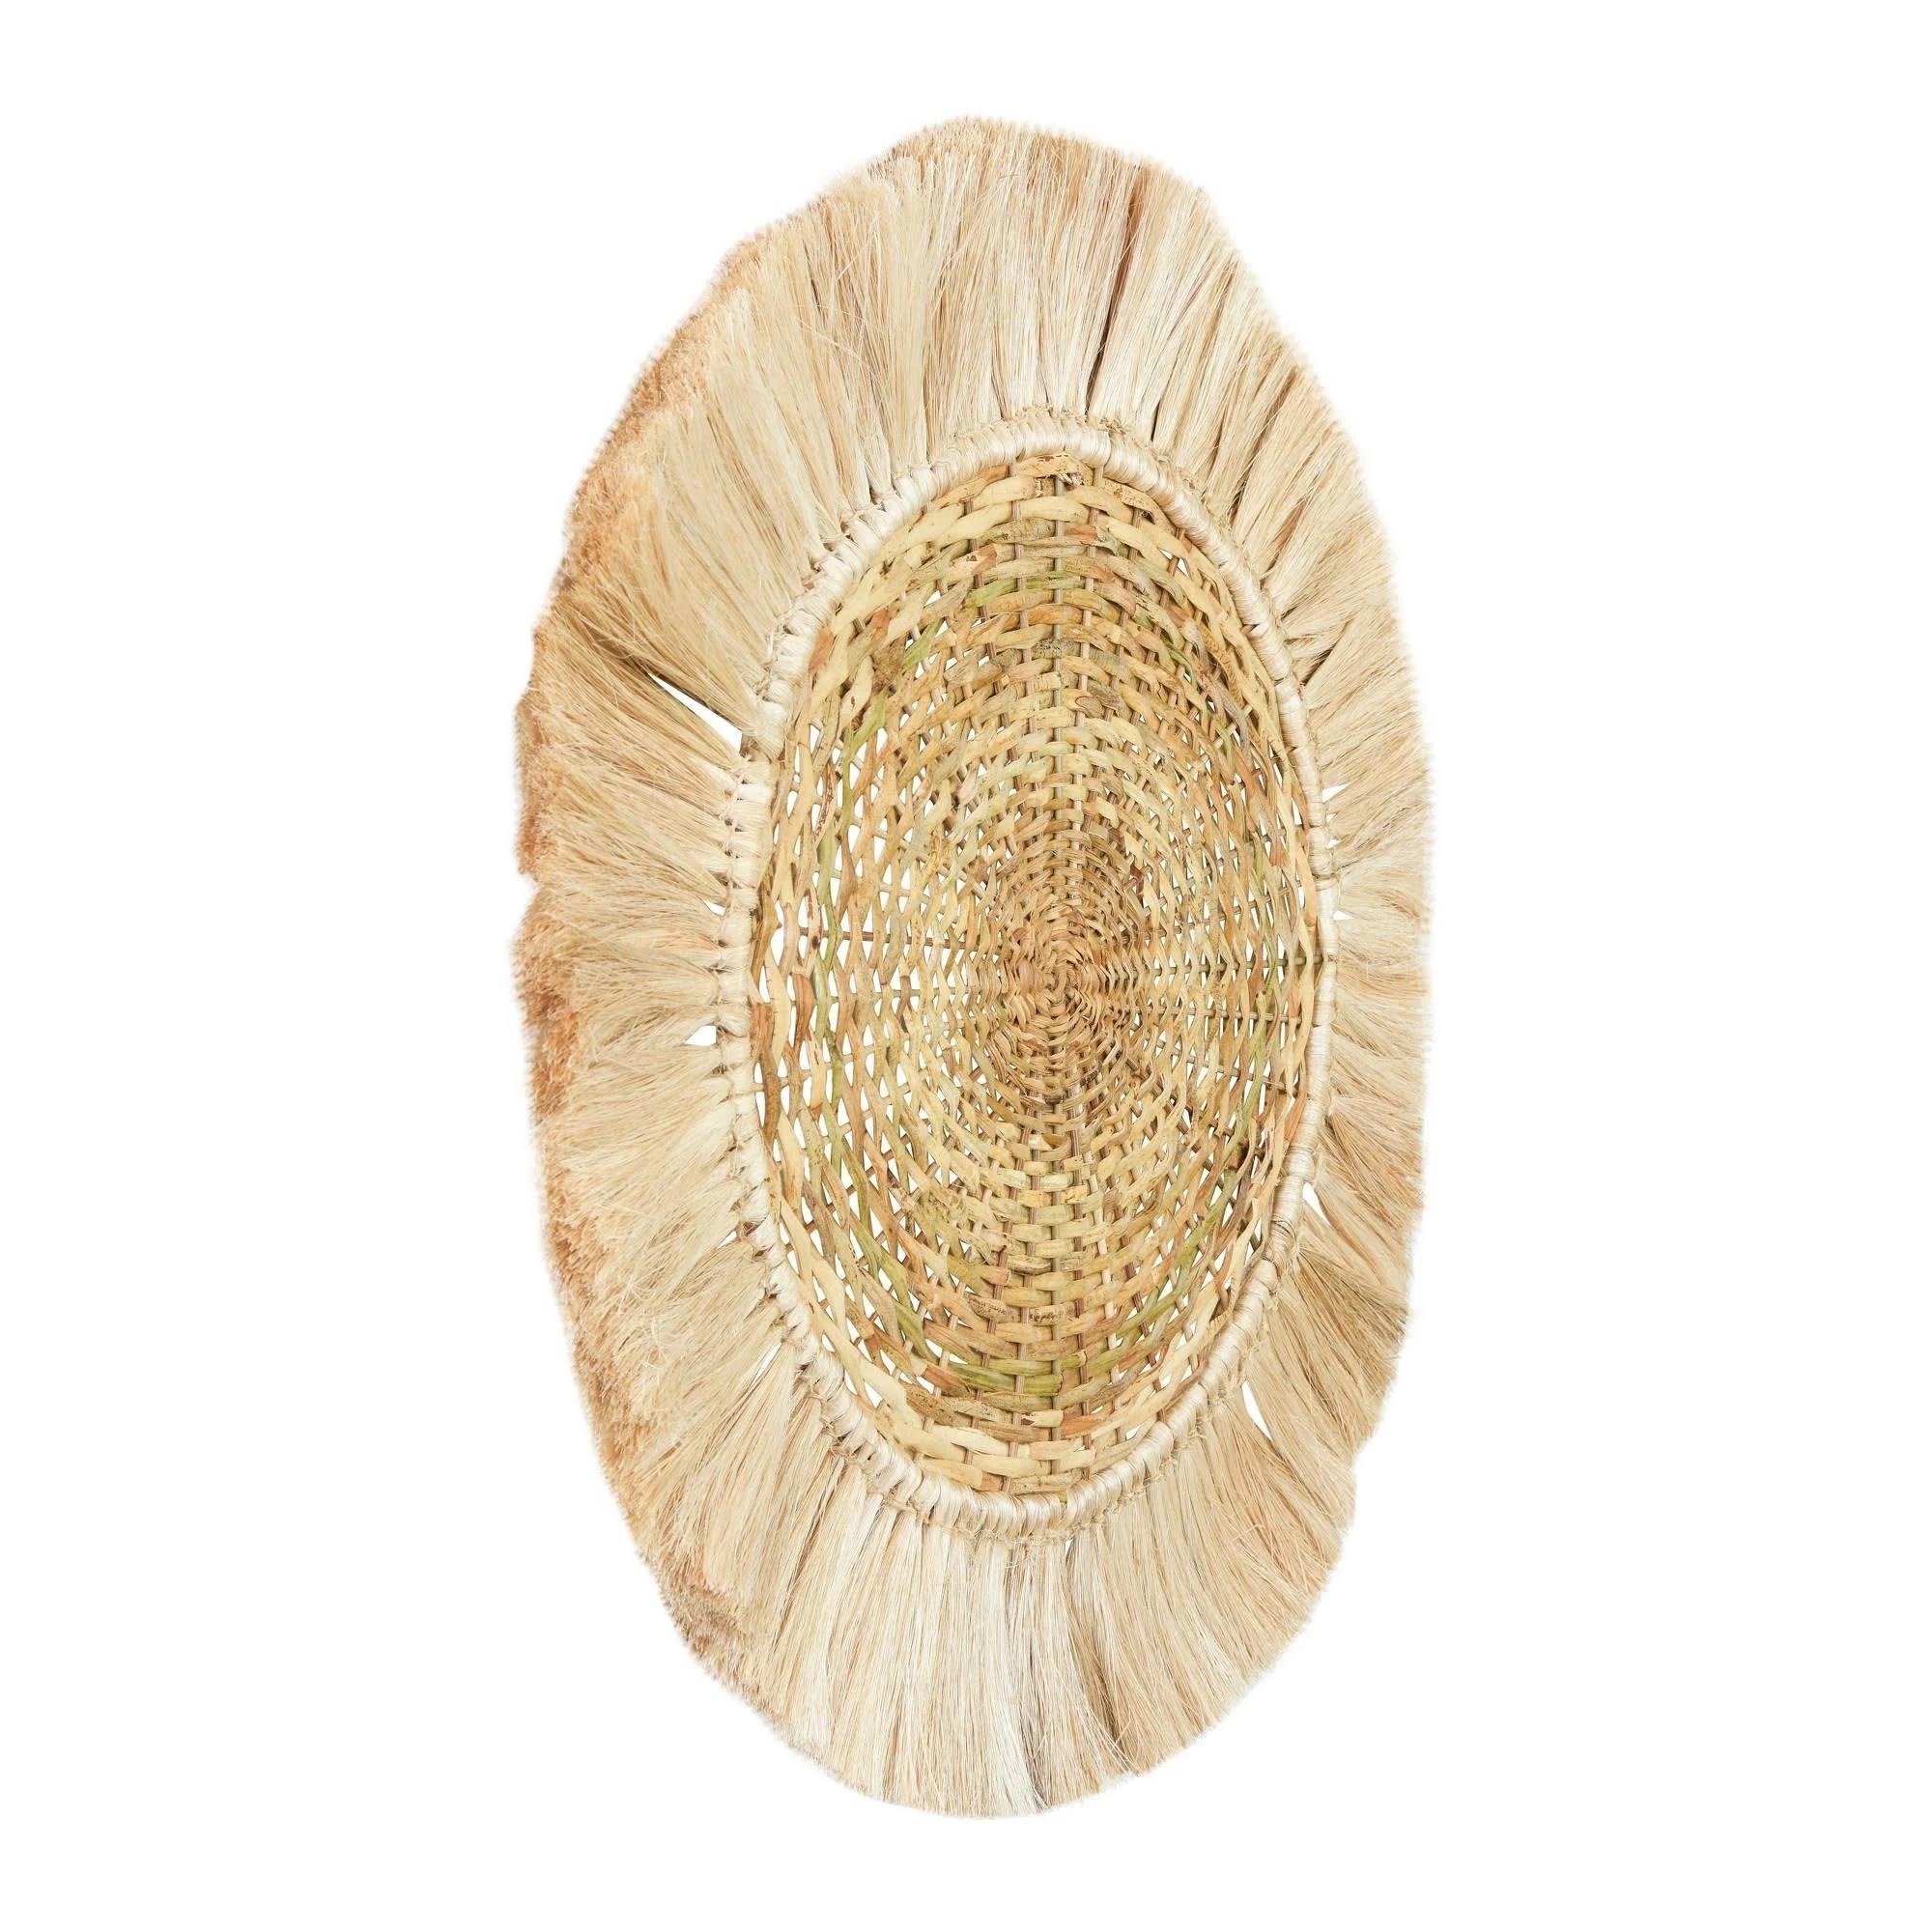 Handwoven Round Rattan & Abaca Wall Décor, 28" - Image 3